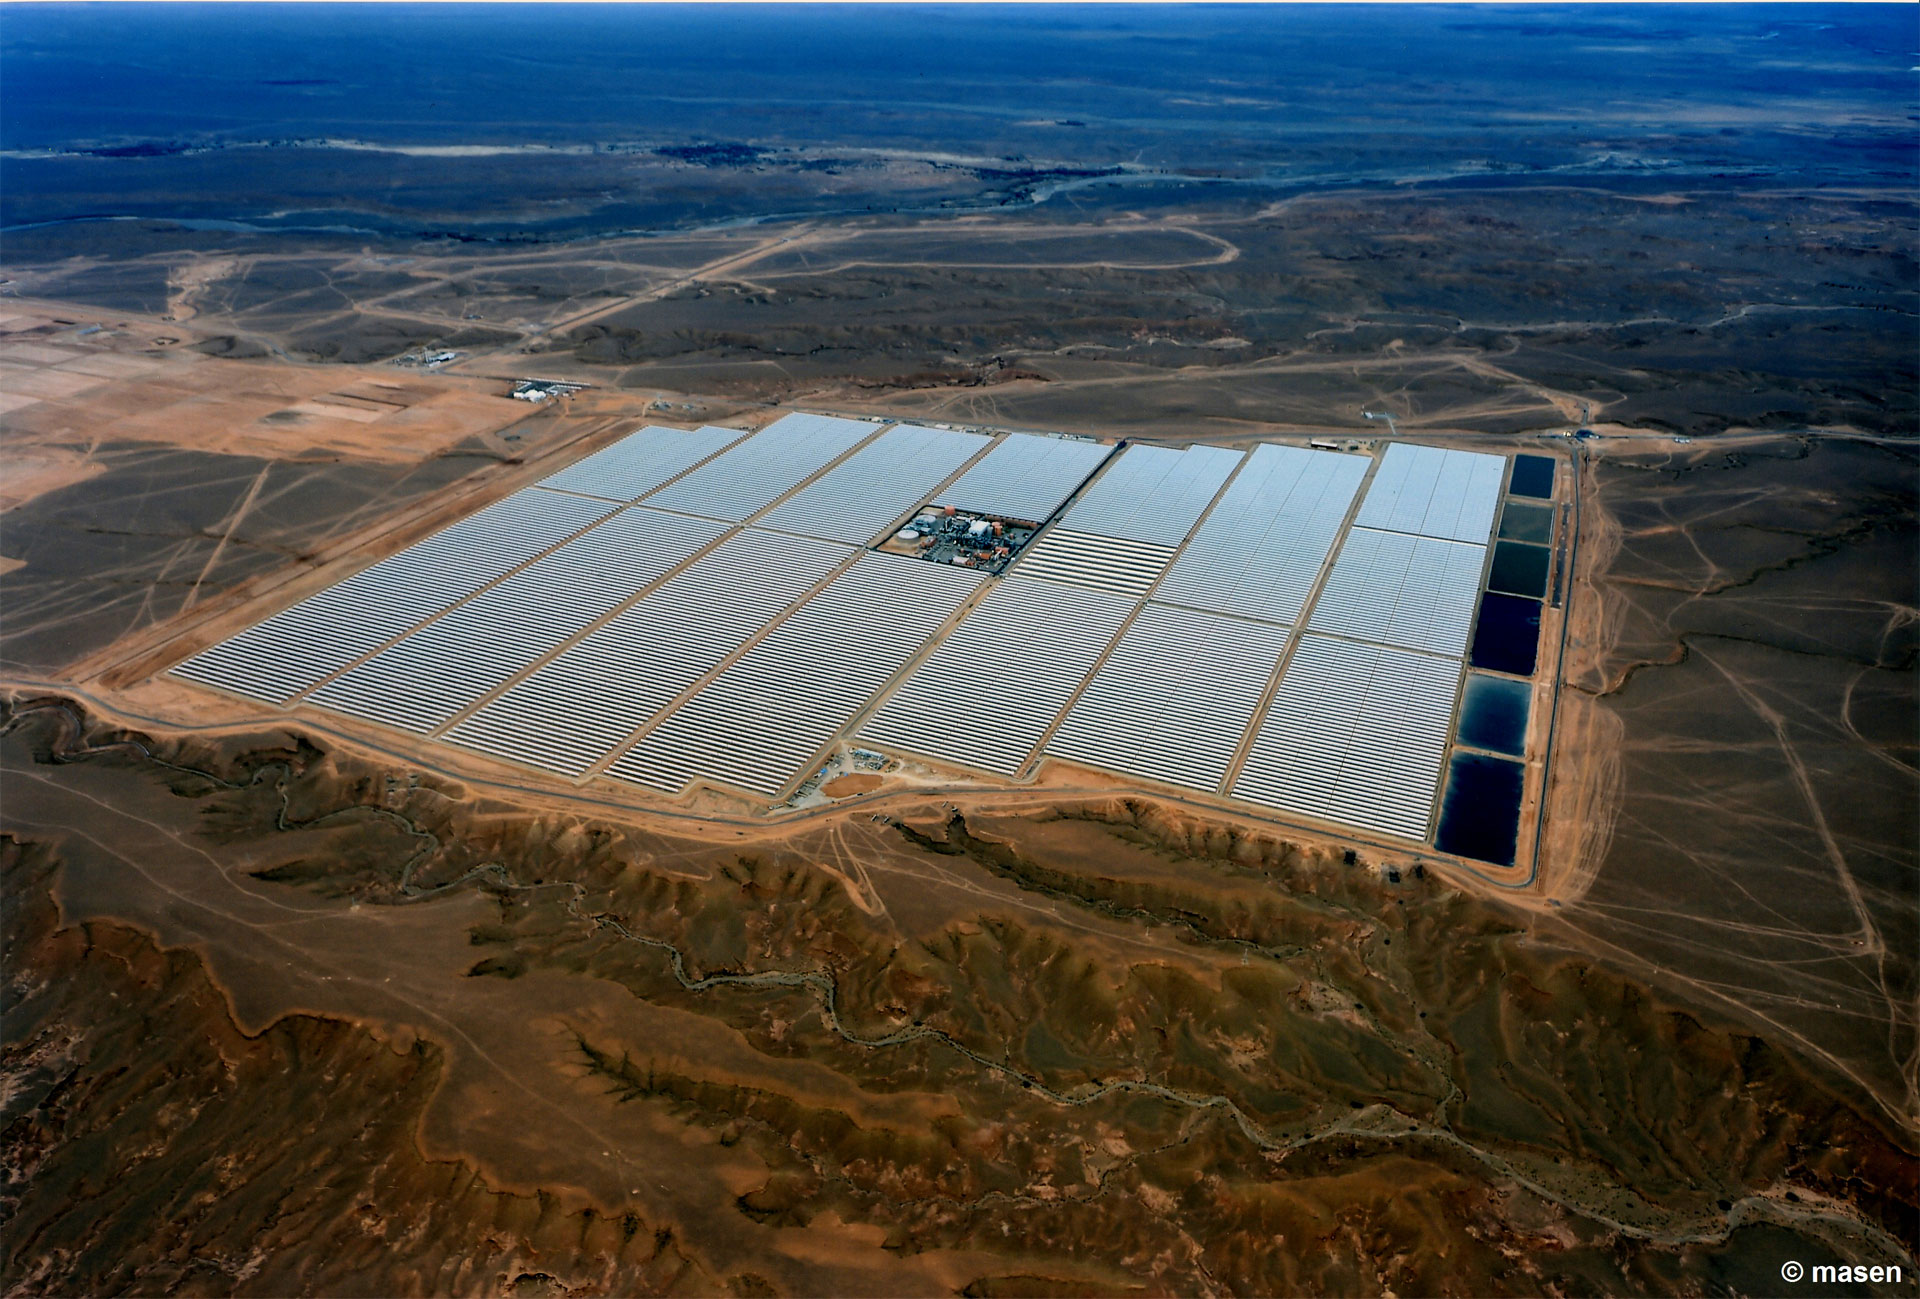 Aerial view of a large solar farm with rows of photovoltaic panels, surrounded by arid terrain